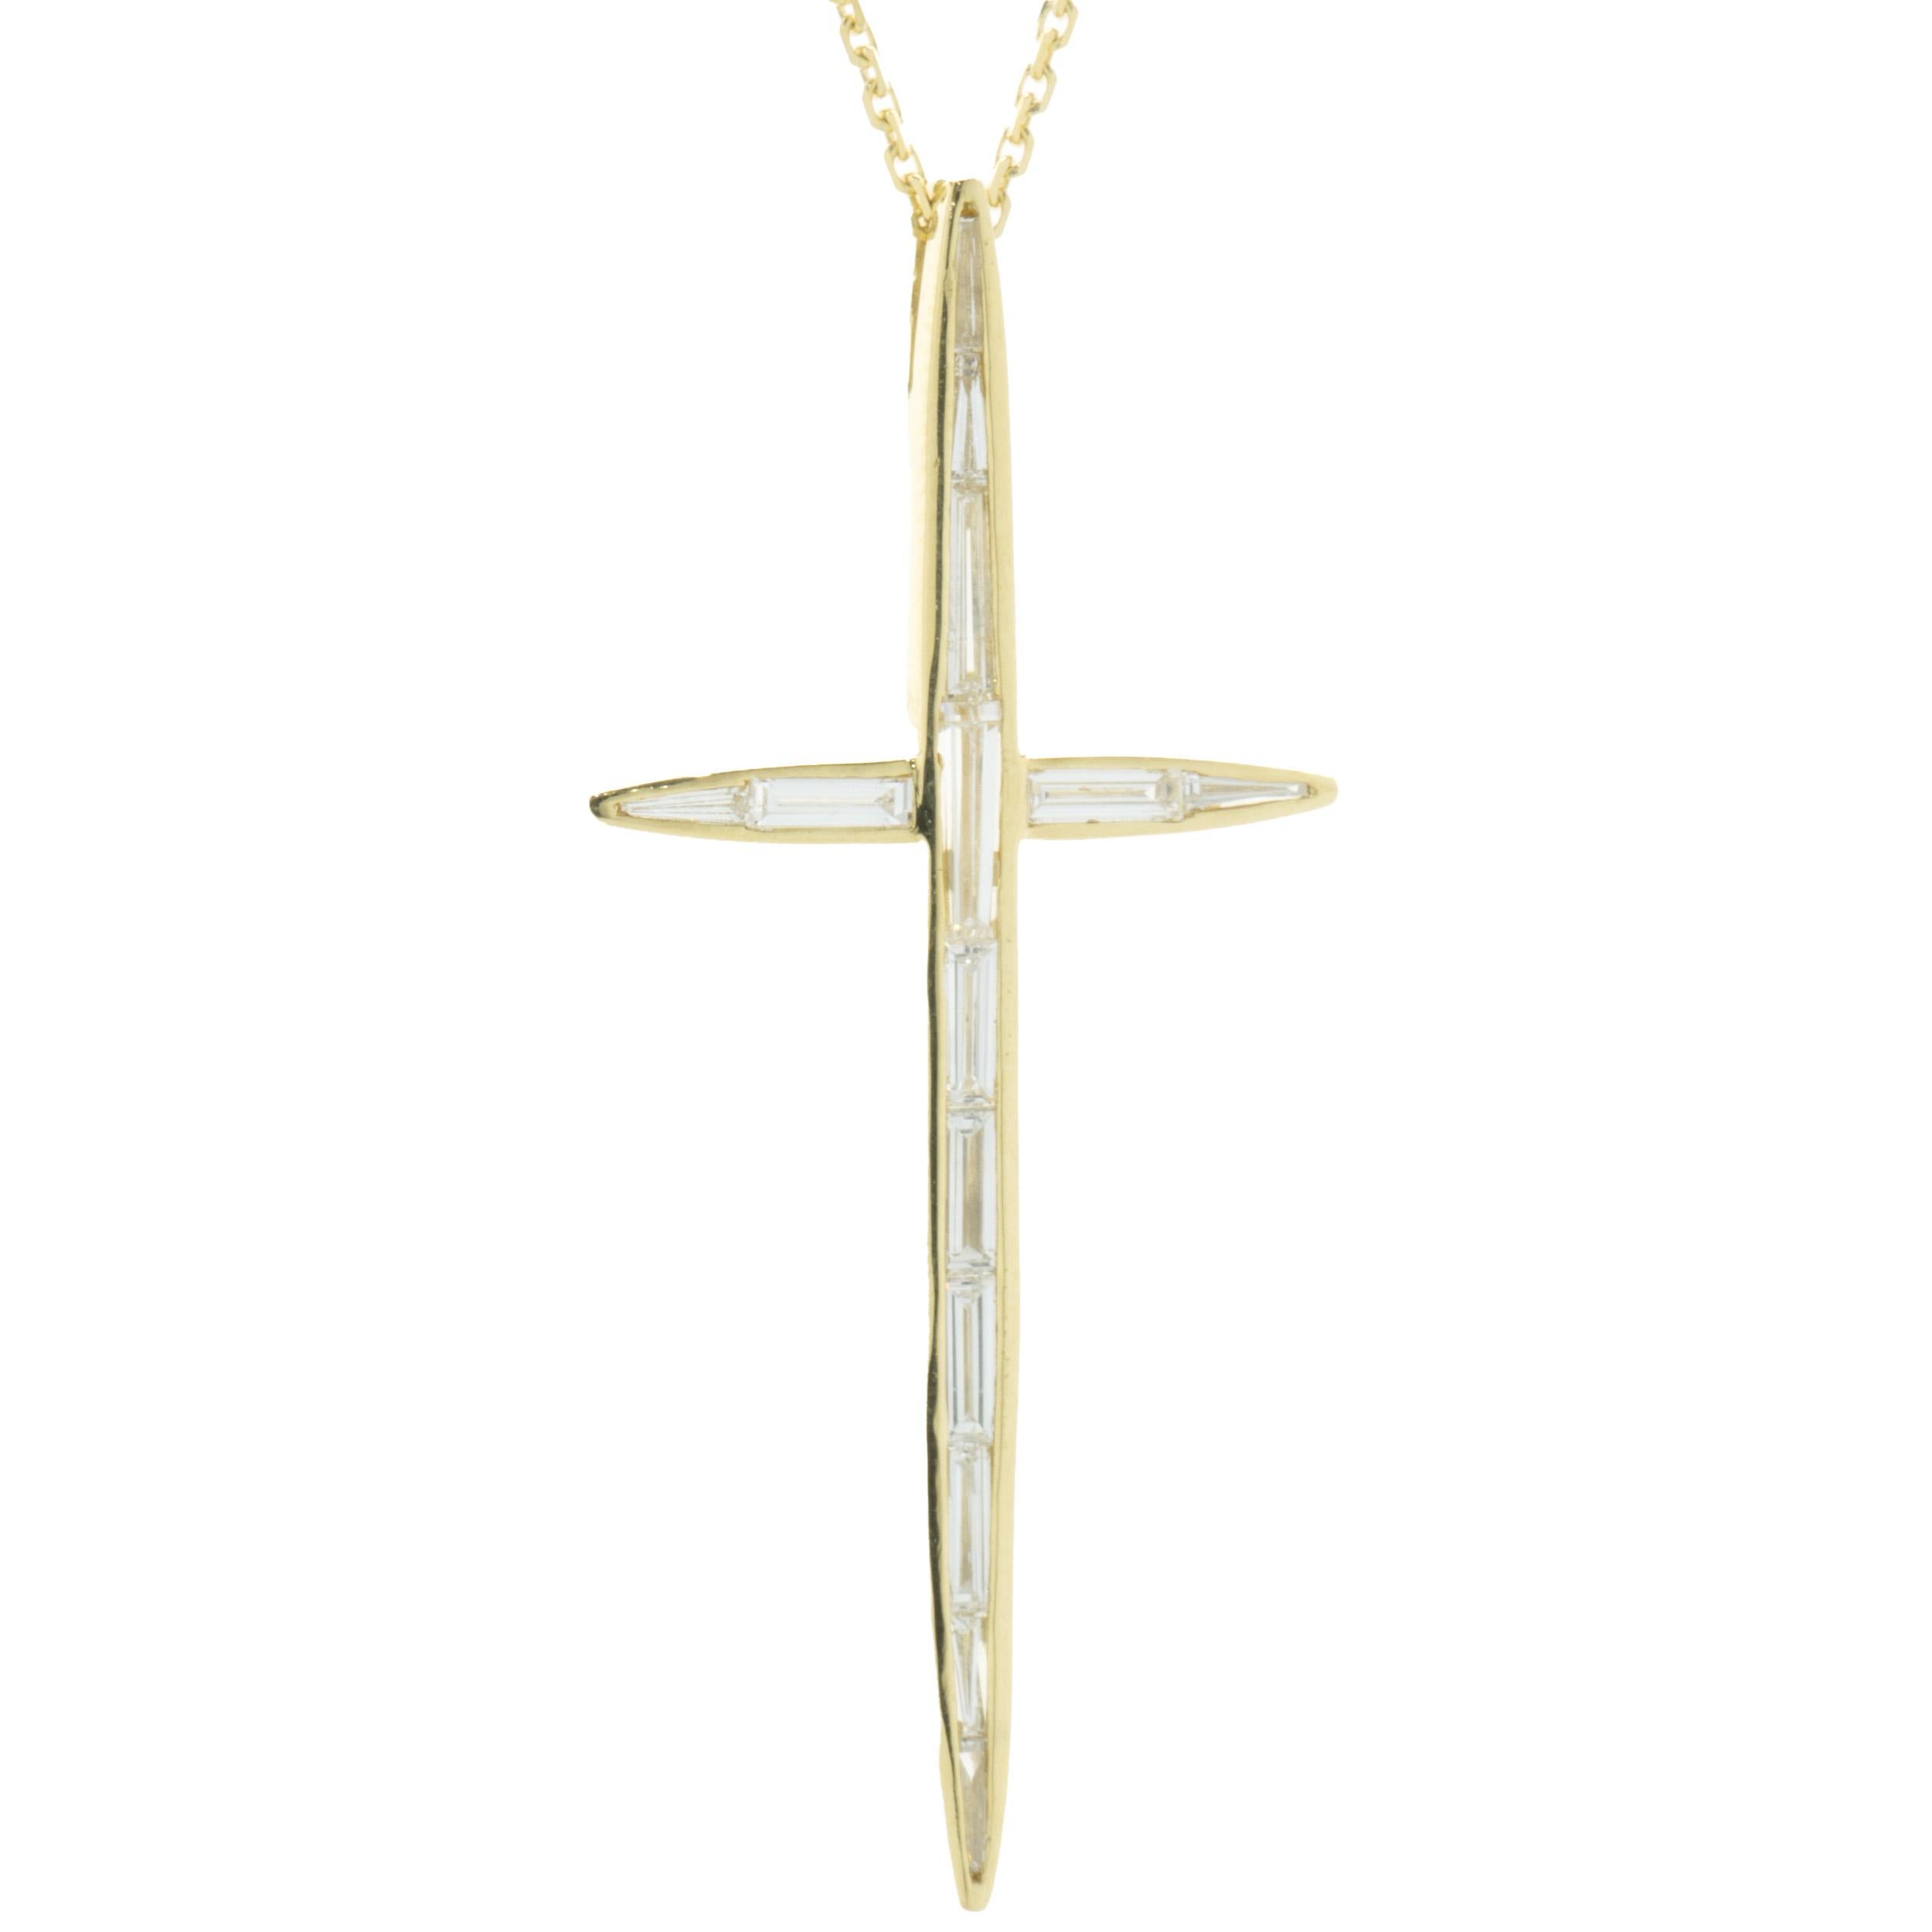 Designer: custom
Material: 14K yellow gold
Diamonds: 14 baguette cut = 1.39cttw
Color: H
Clarity: SI1
Dimensions: necklace measures 18-inches in length 
Weight: 5.64 grams